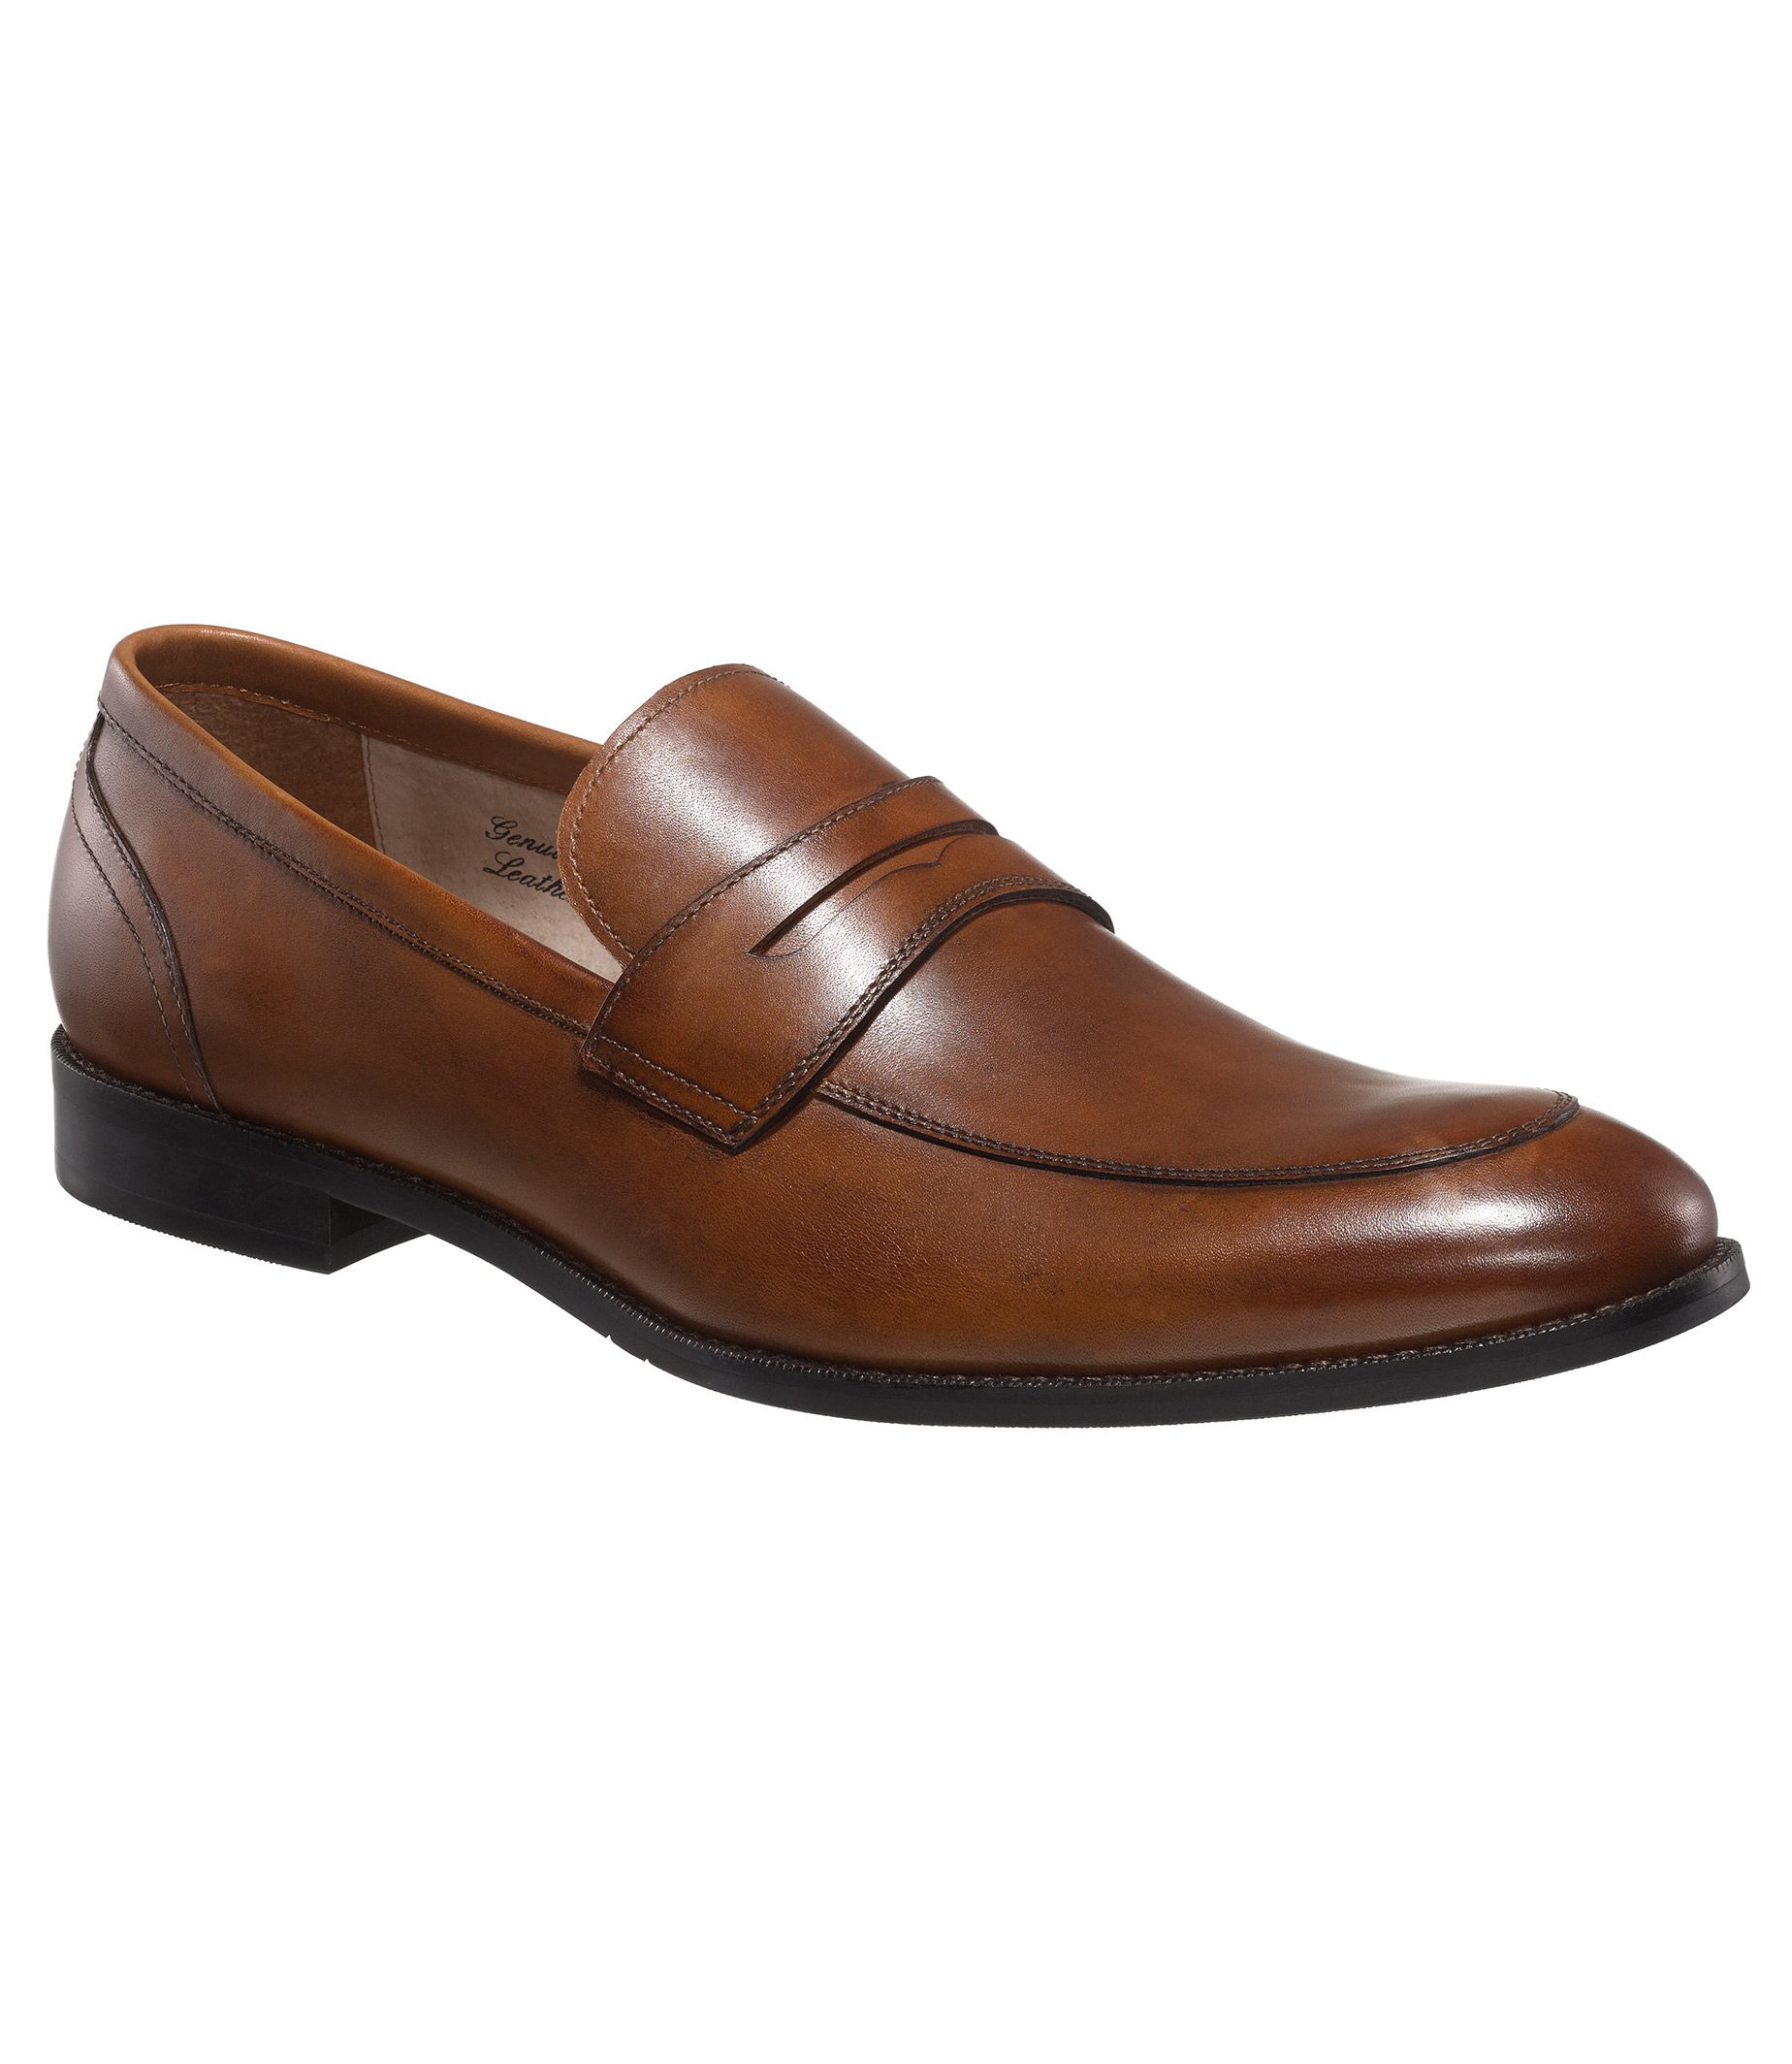 Joseph Abboud Clarence Penny Loafers - 